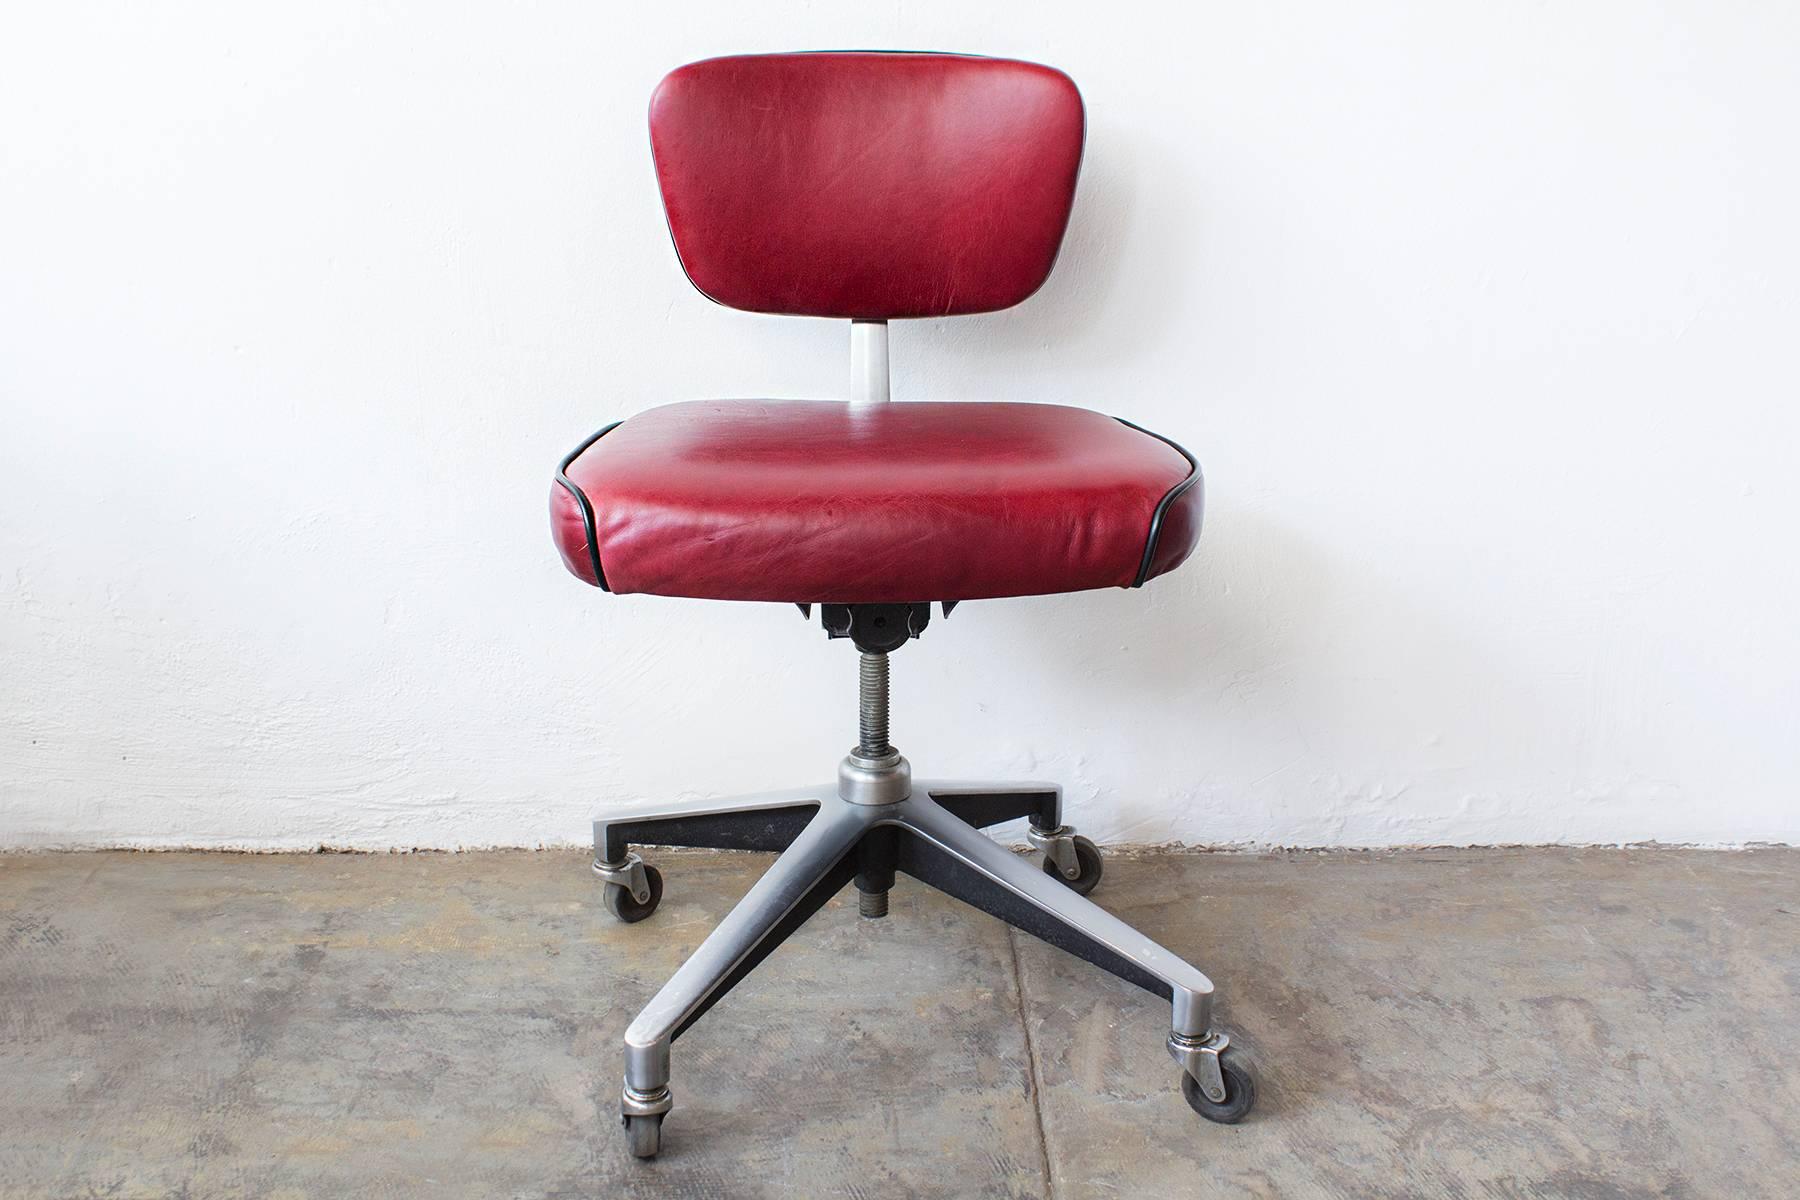 We refinished our retro Industrial steno chair in cherry red leather with black vinyl piping. This Classic 1960s piece is especially unique for its cast aluminium base. Swivels, rolls and adjusts.